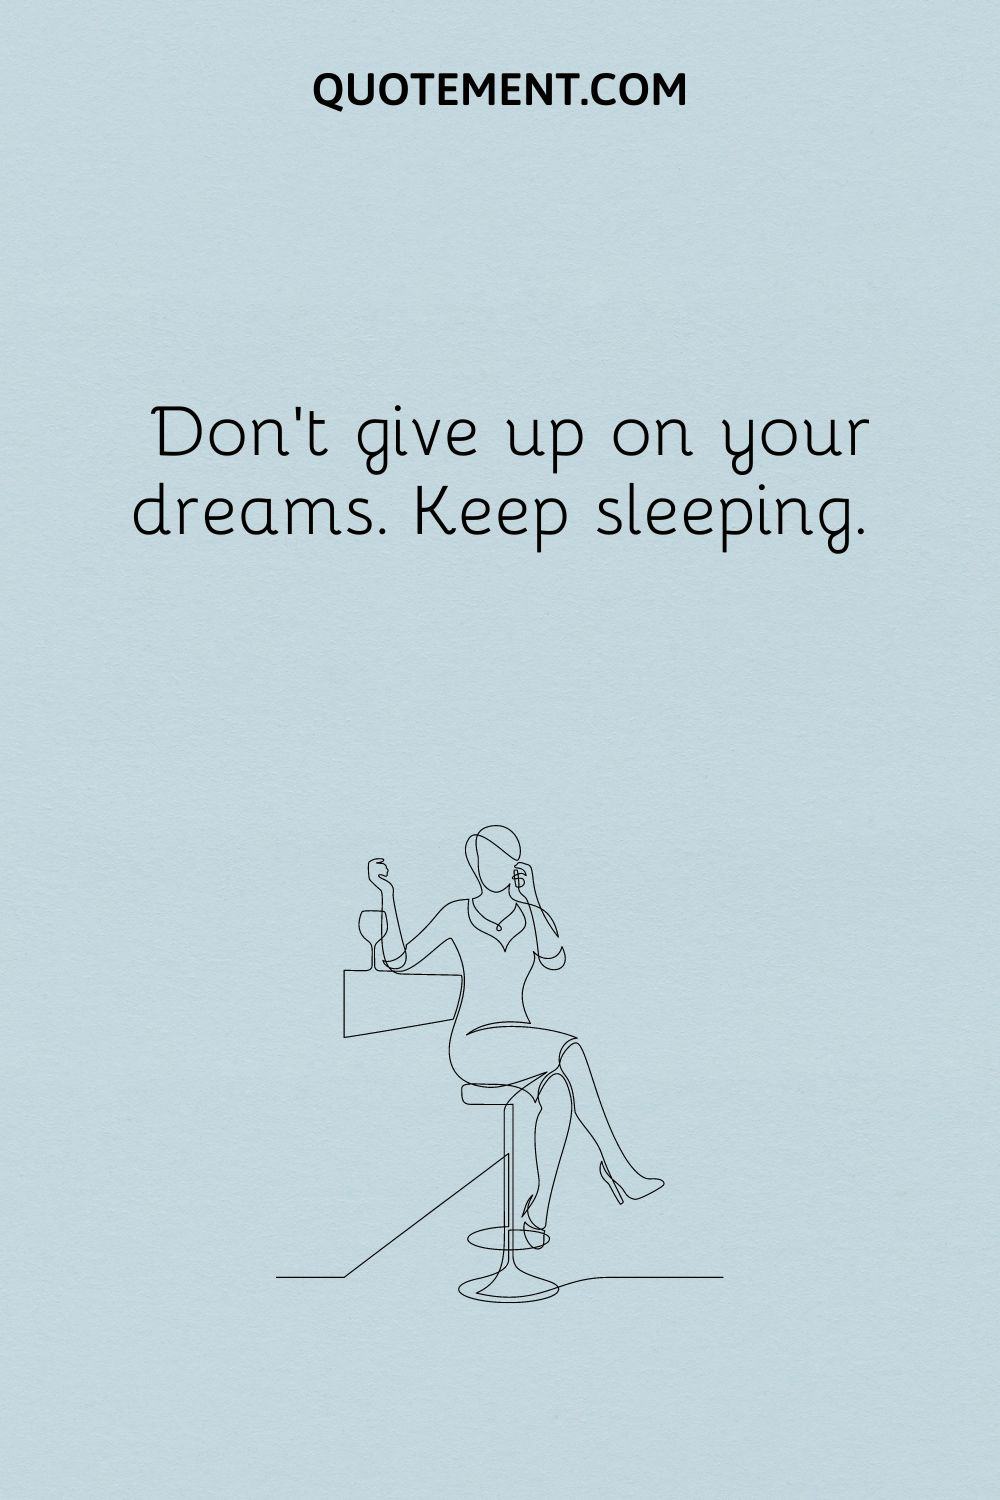 Don’t give up on your dreams. Keep sleeping.